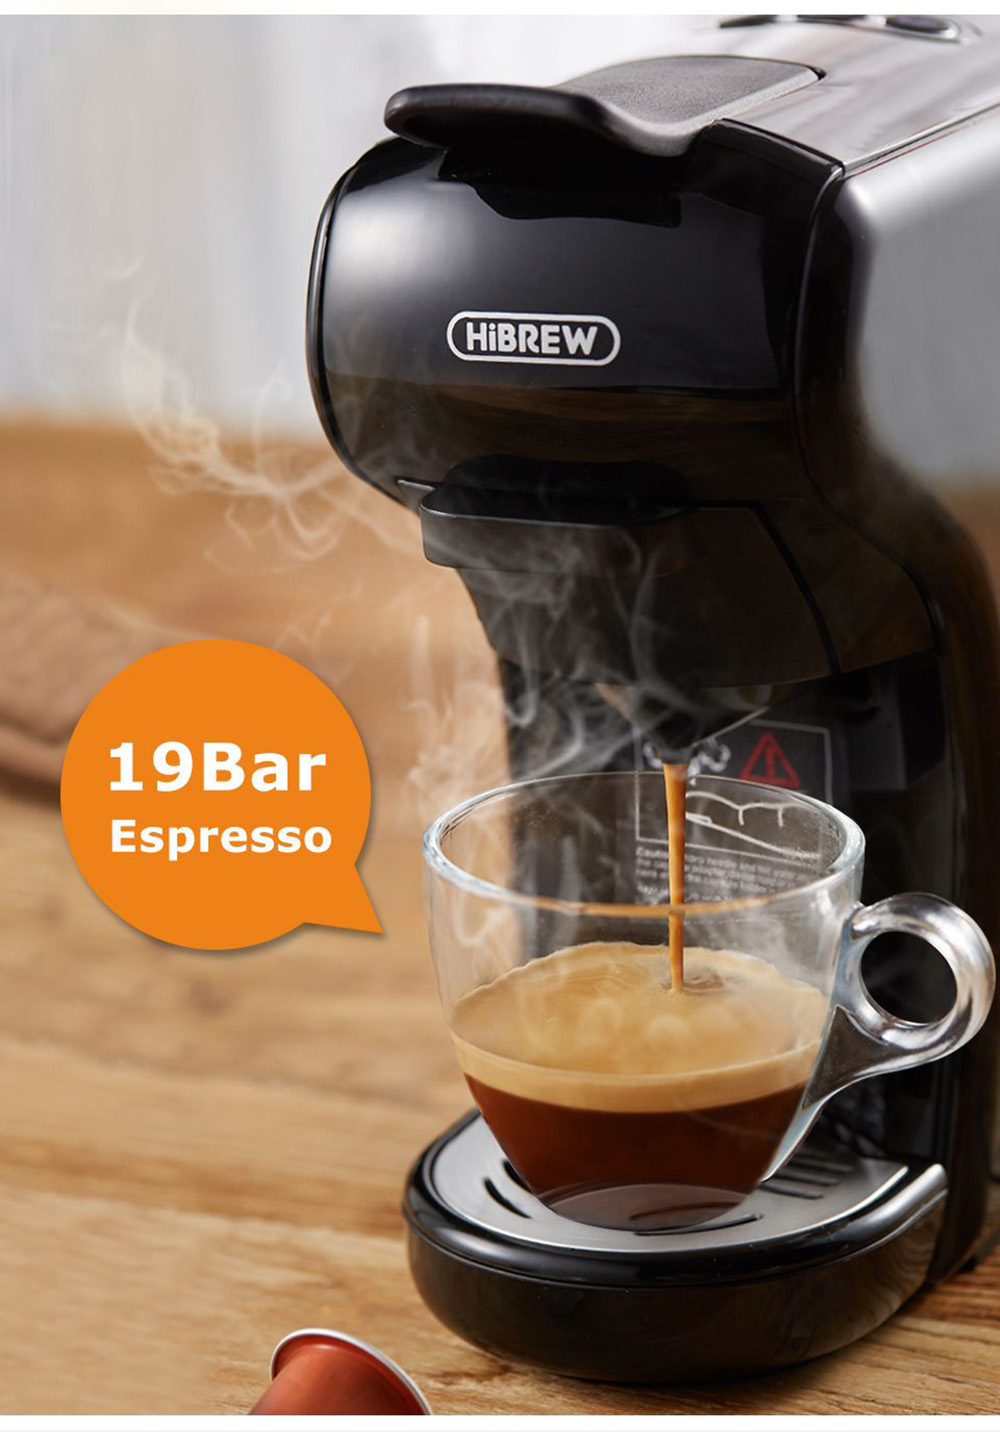 HiBREW H1A 1450W Espresso Coffee Machine, 19 Bar Extraction, Hot/Cold 4-in-1 Multiple Capsule Coffee Maker - Black